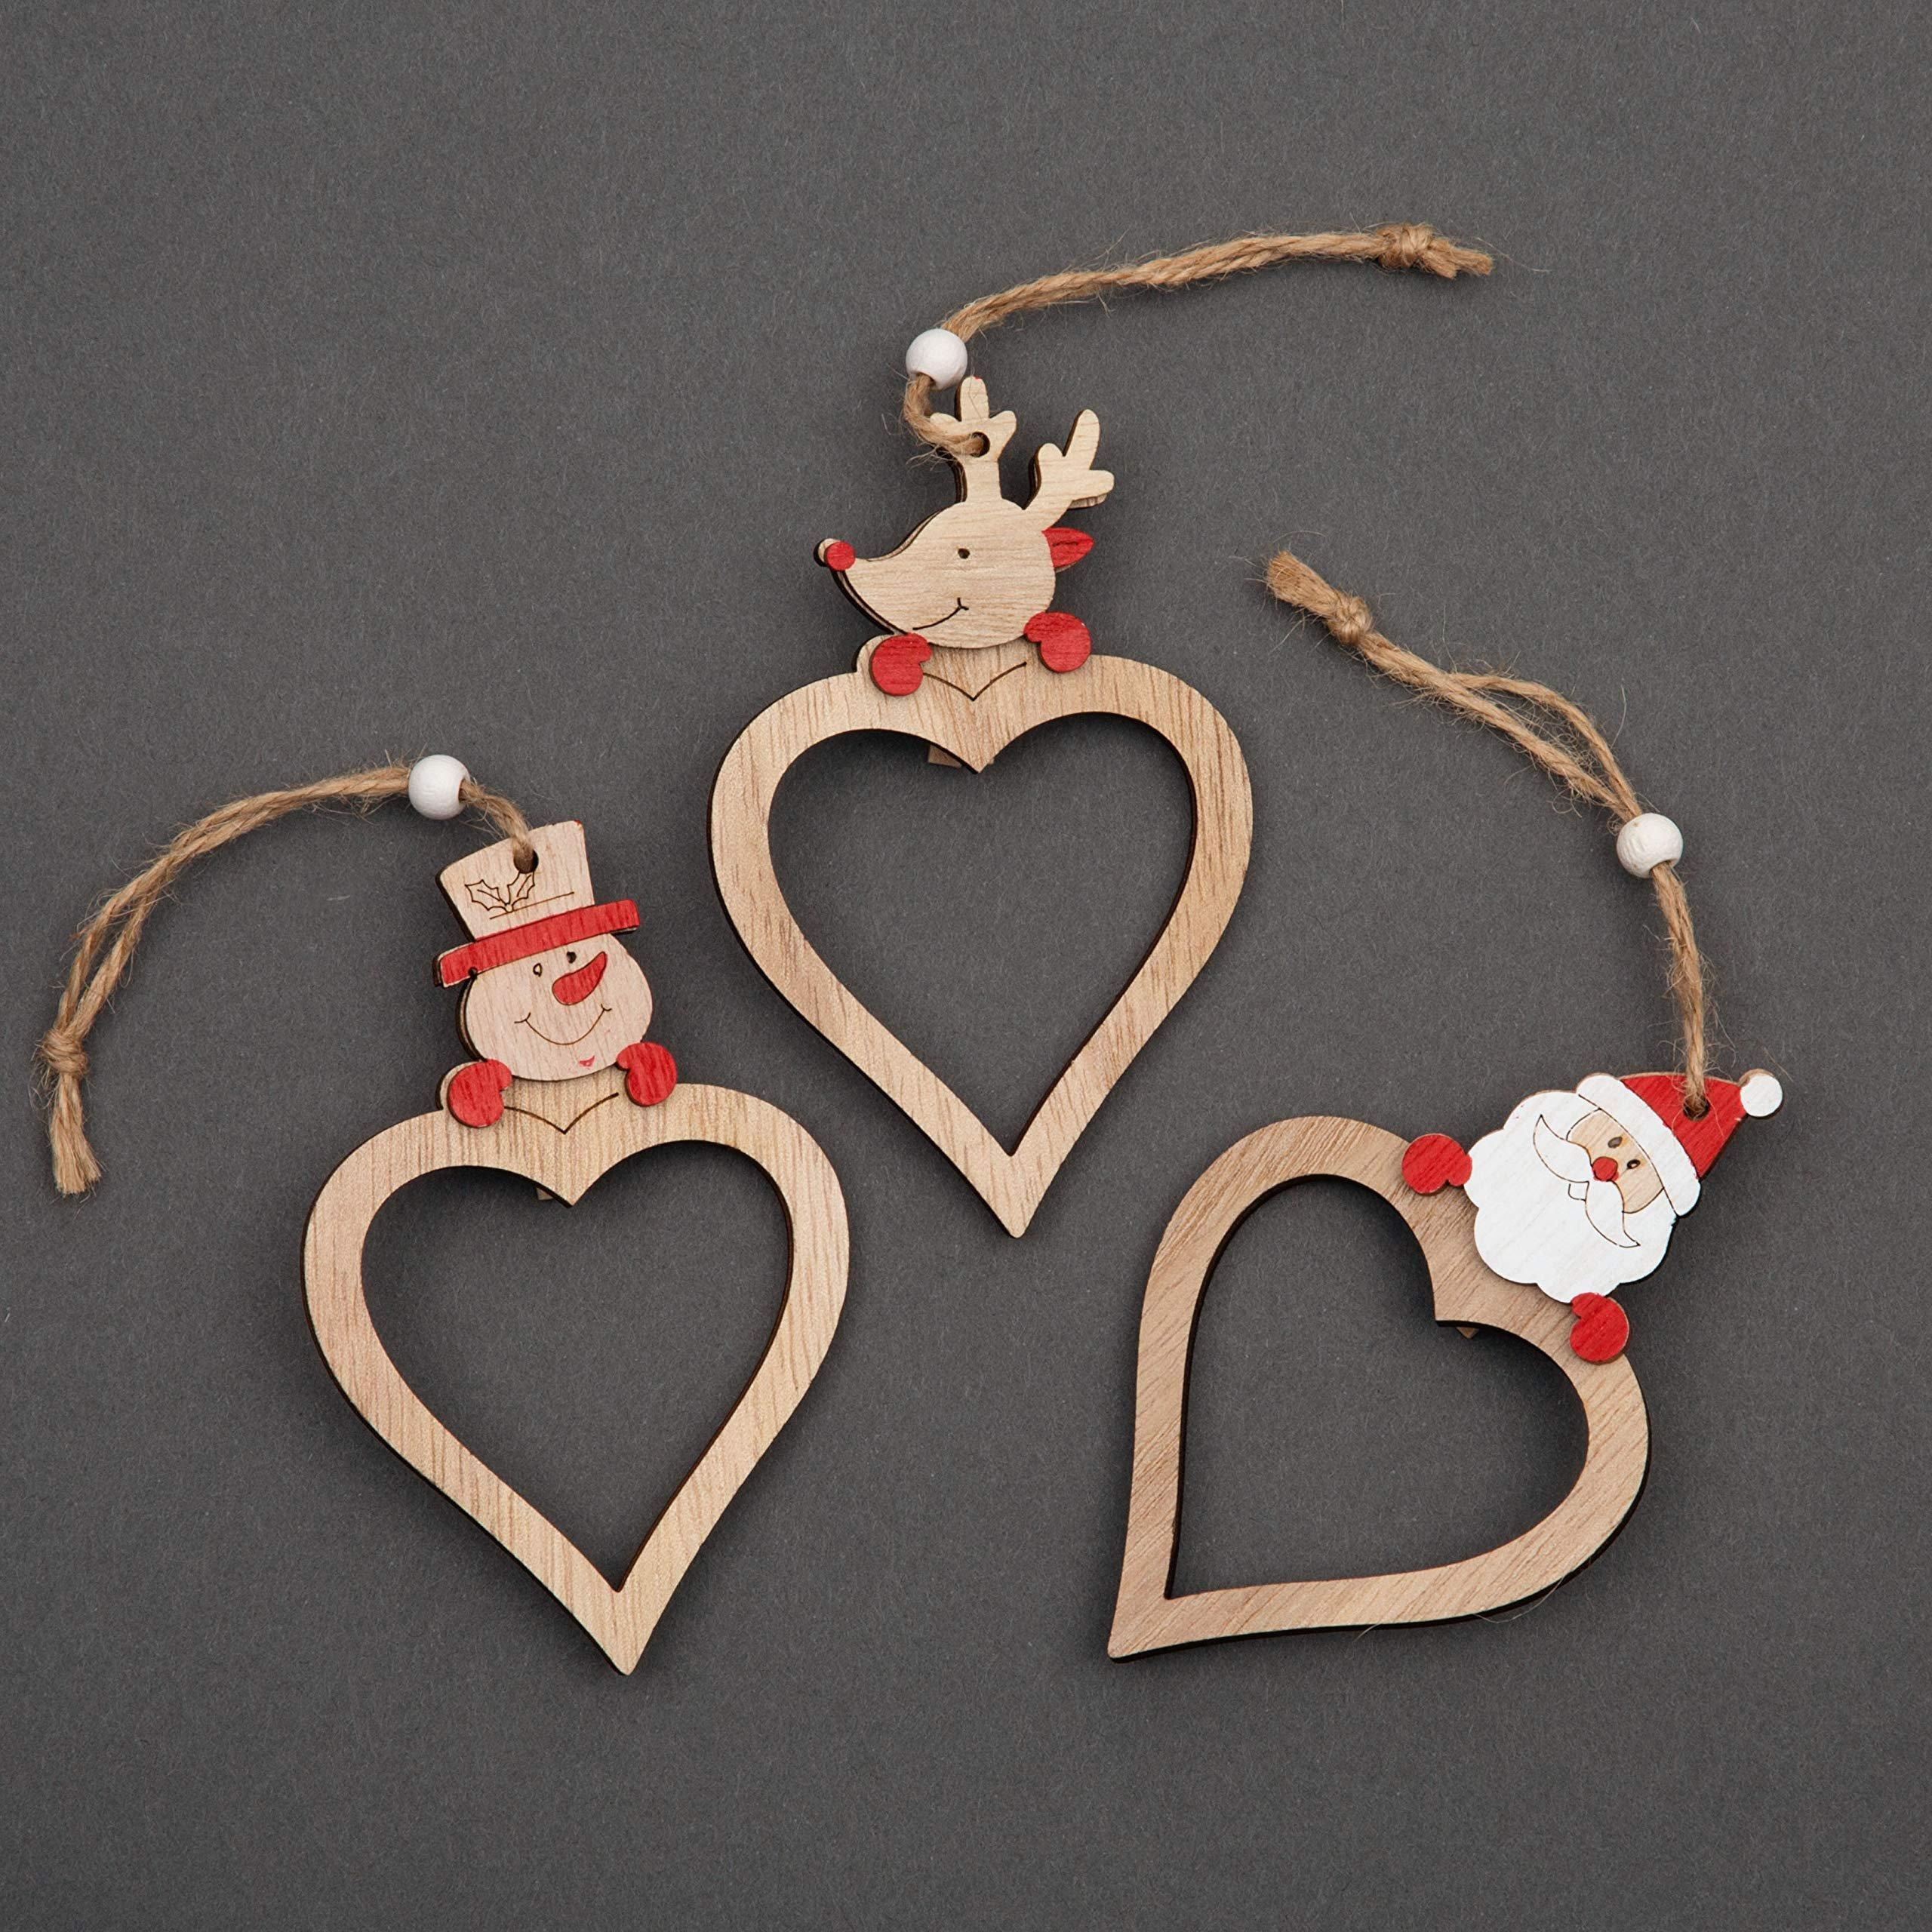 Christmas Tree Ornaments Wooden Aesthetic Hanging Decorations Heart Shape 3Pcs - image 1